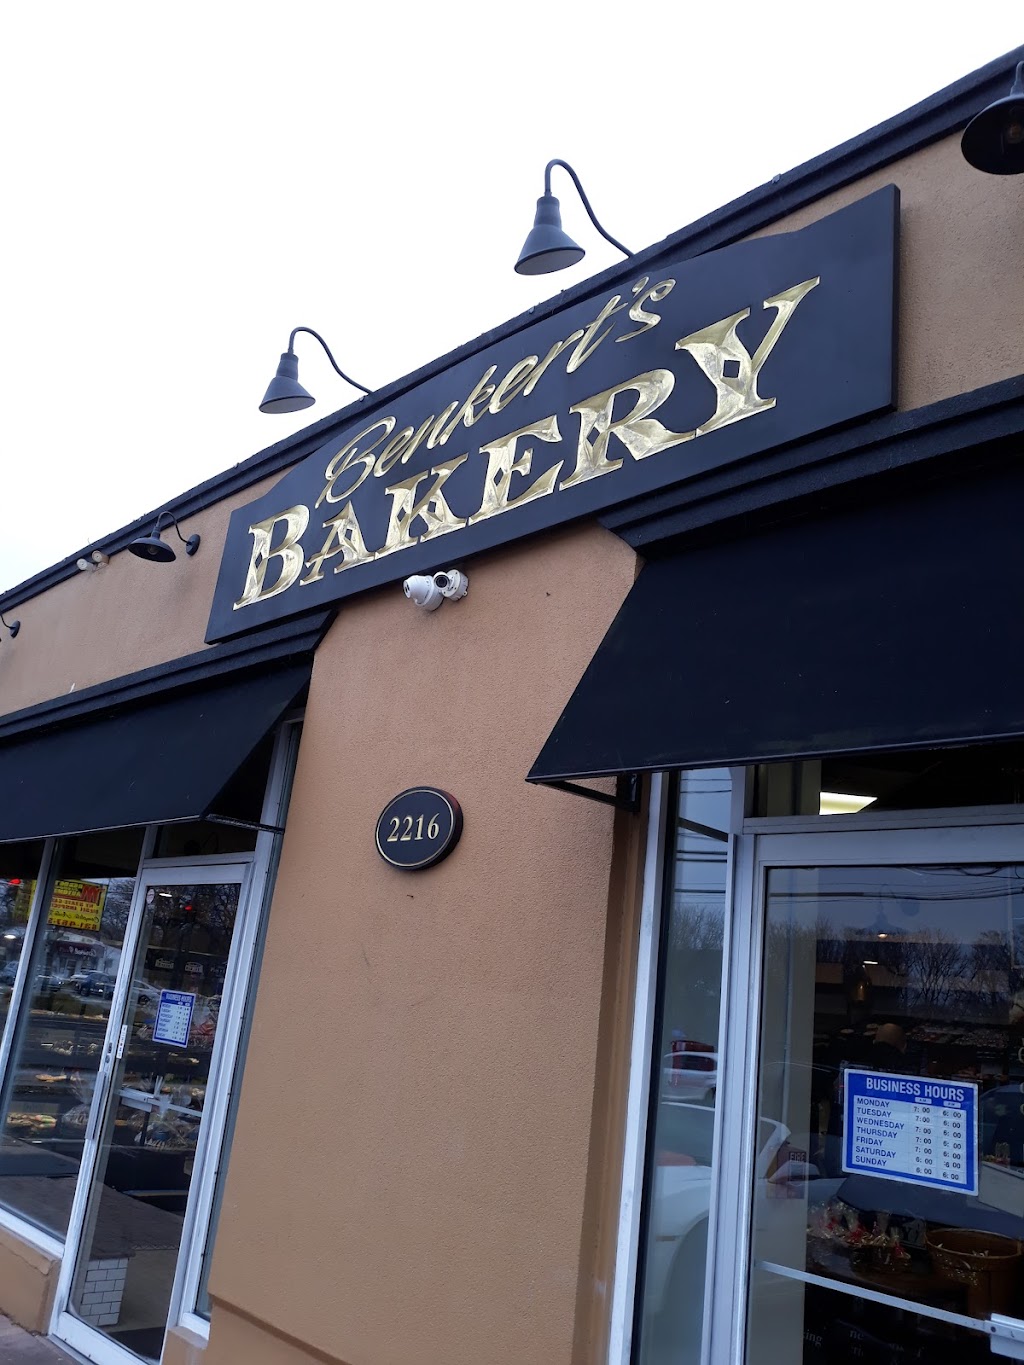 Benkerts Bakery | 2216 Middle Country Rd, Centereach, NY 11720 | Phone: (631) 585-8618